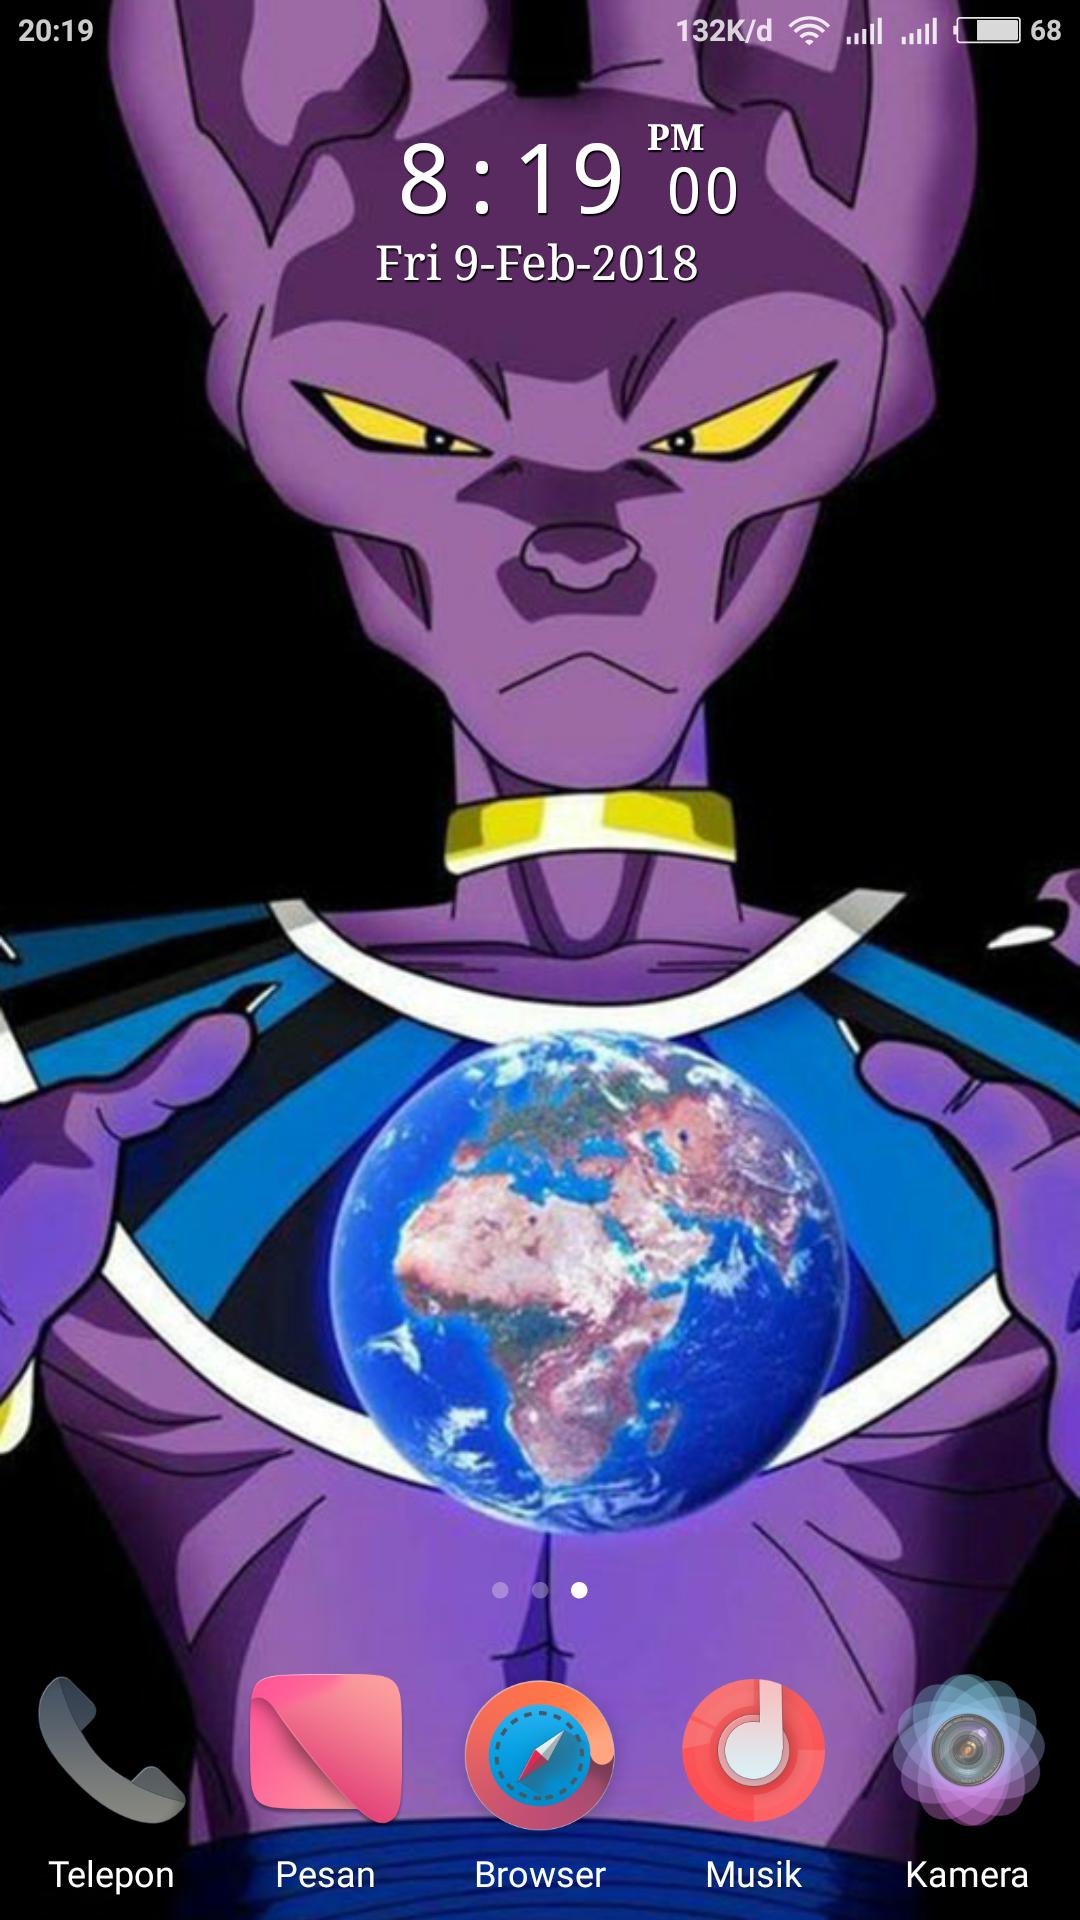 50 Beerus Dragon Ball HD Wallpapers and Backgrounds